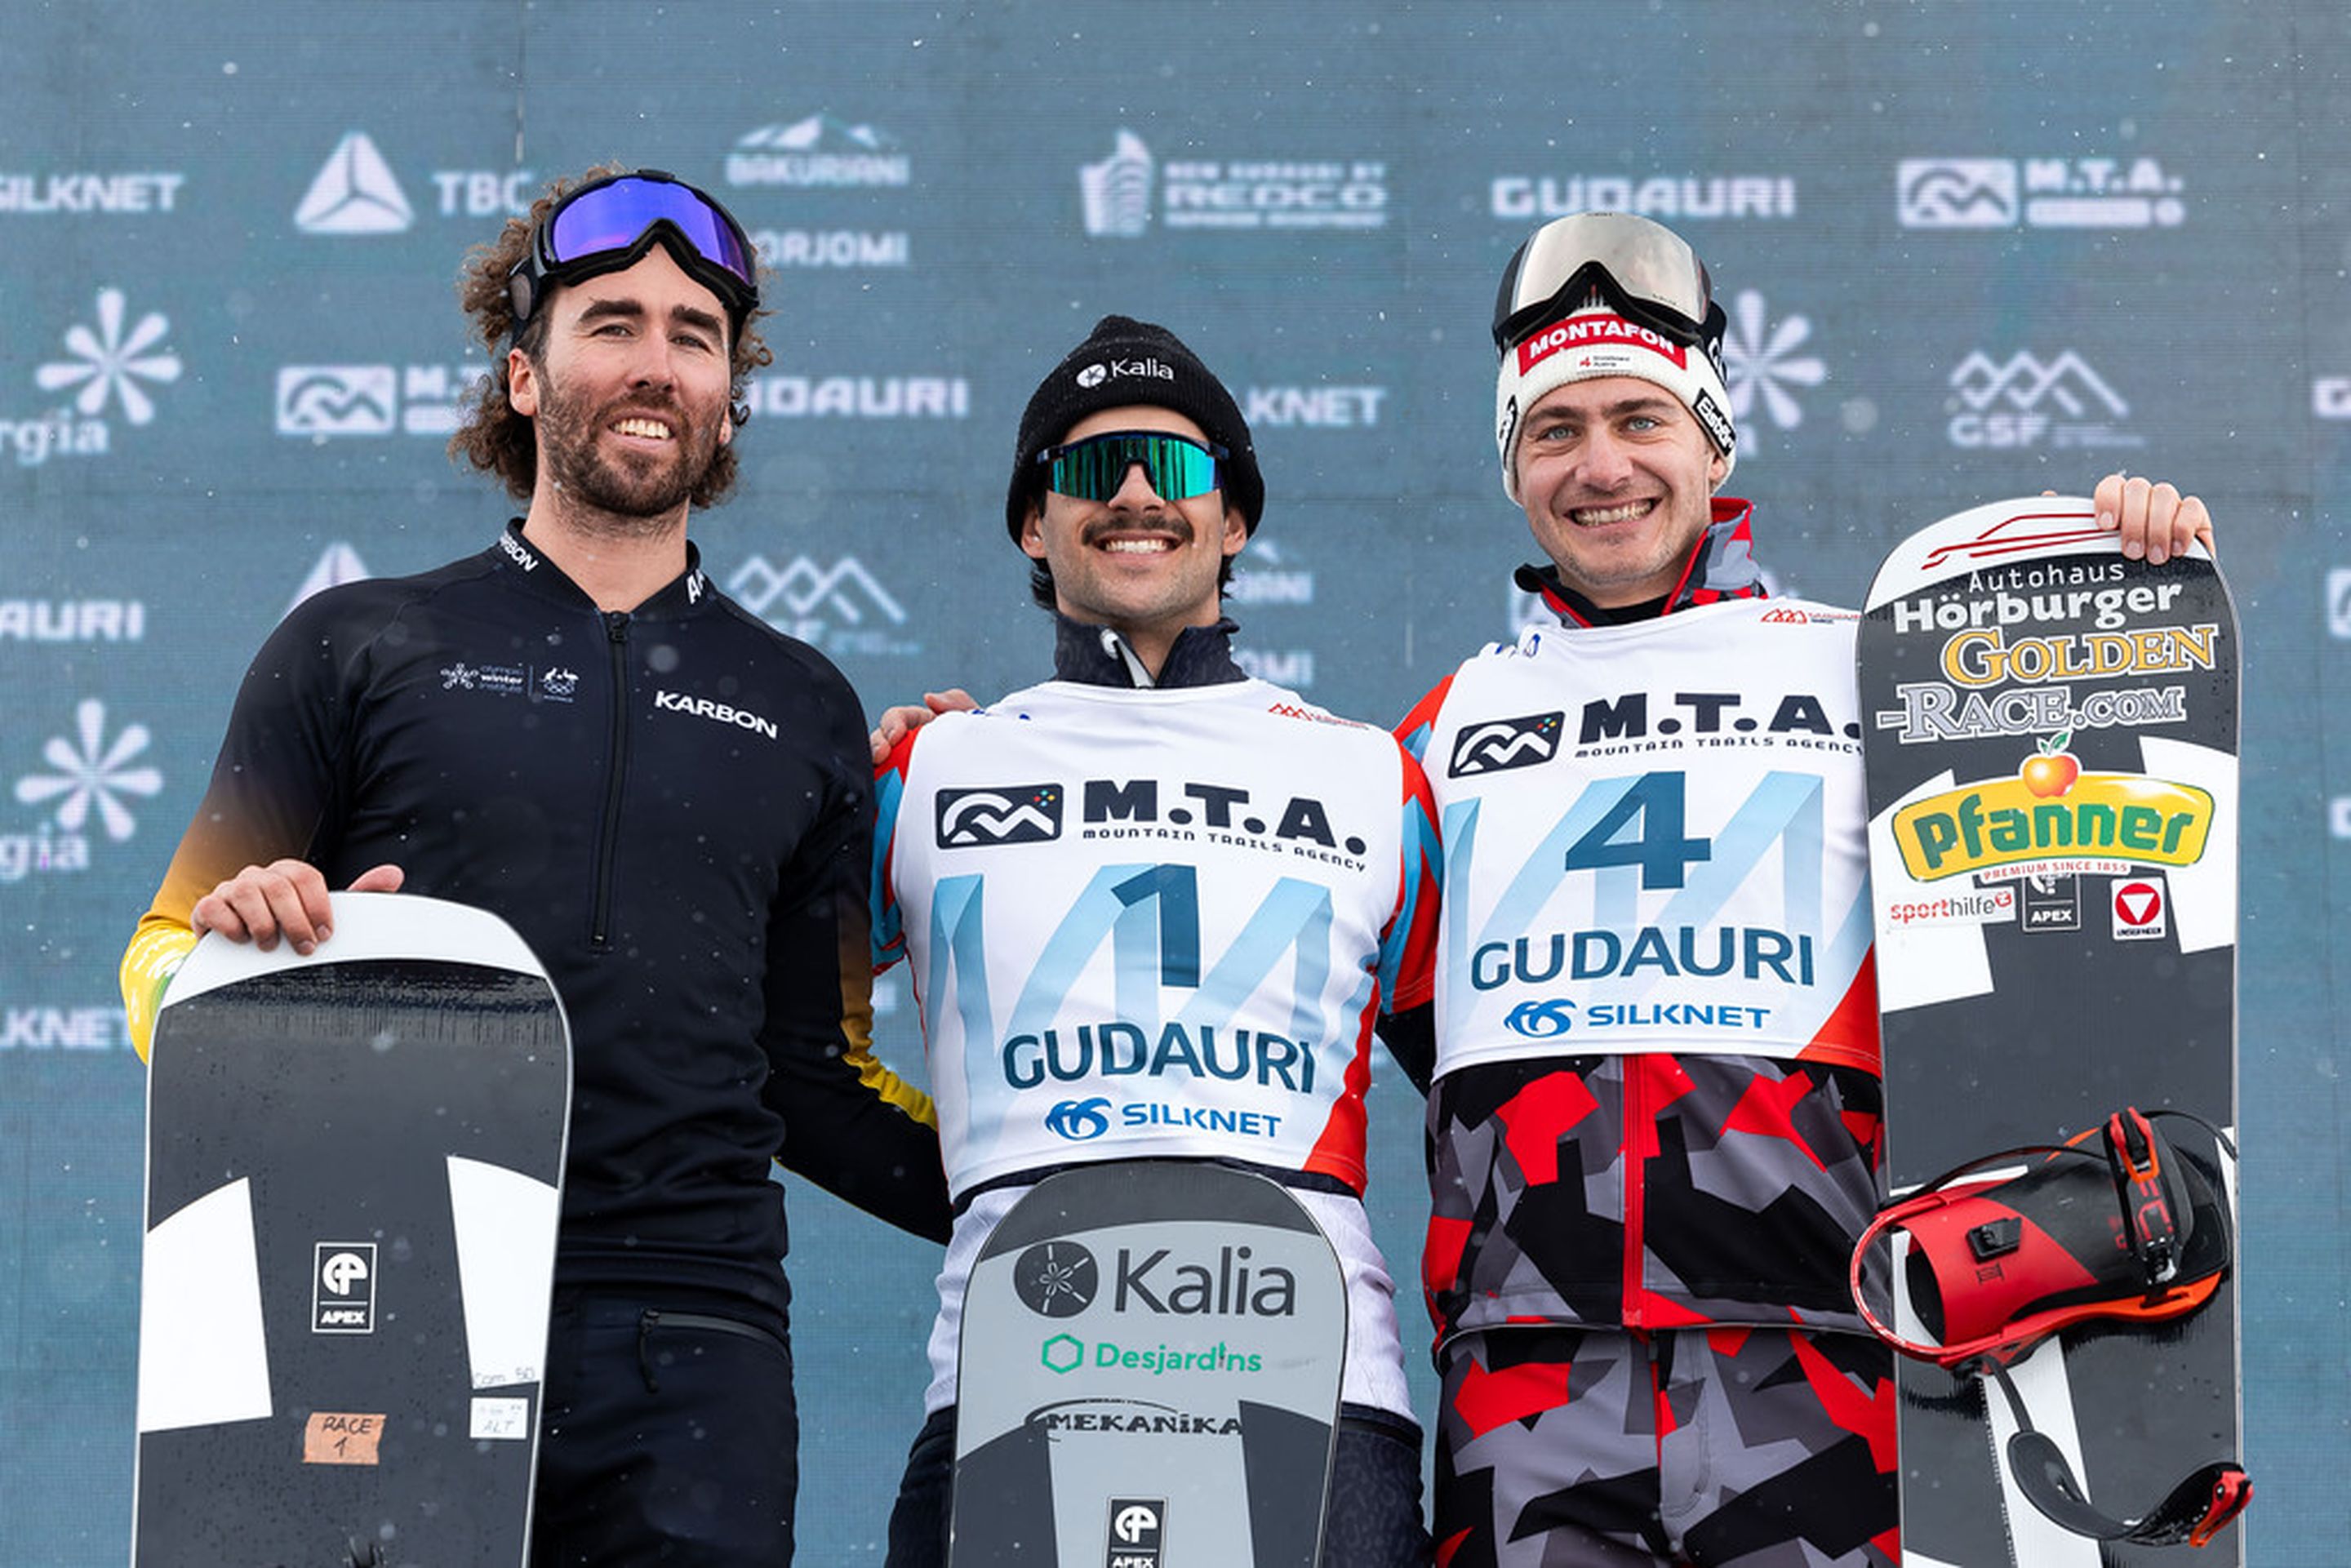 Grondin, Bolton and Haemmerle on the podium in Gudauri (GEO) in February